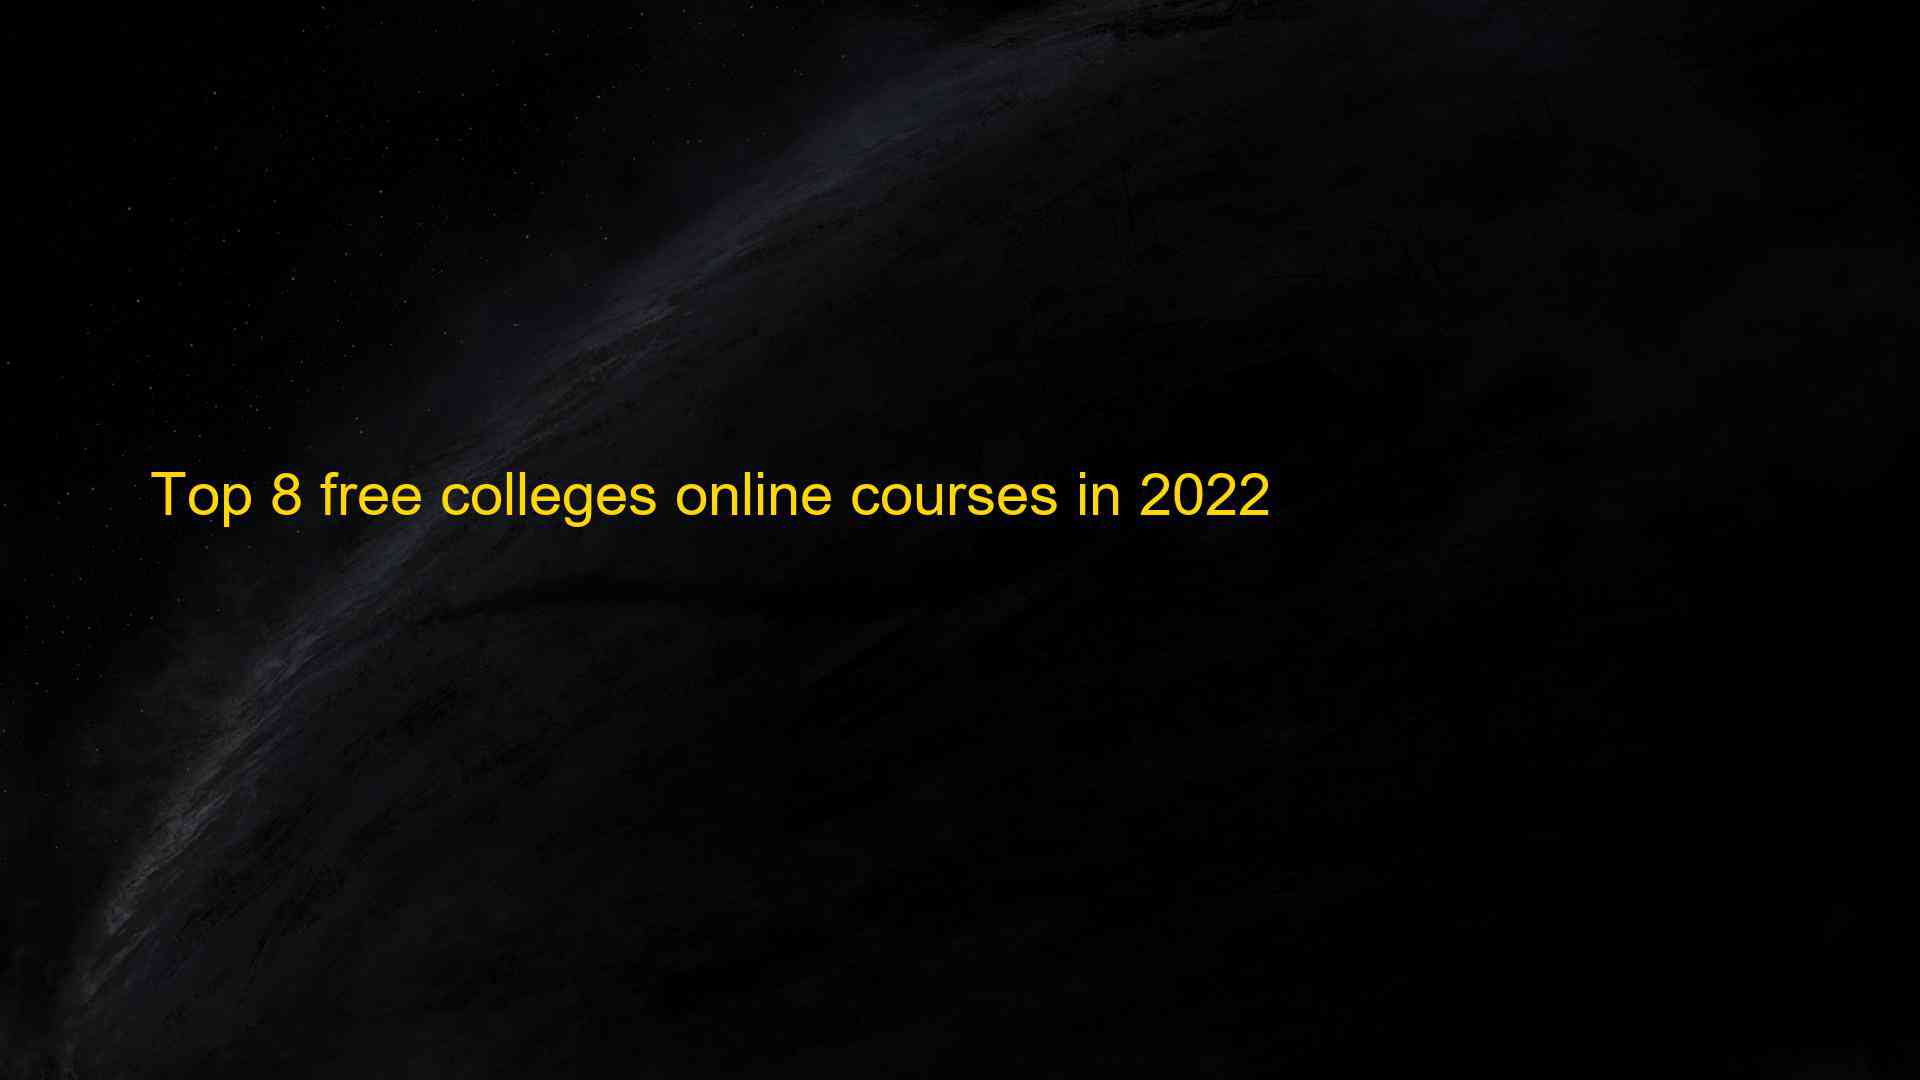 Top 8 free colleges online courses in 2022 1660872644